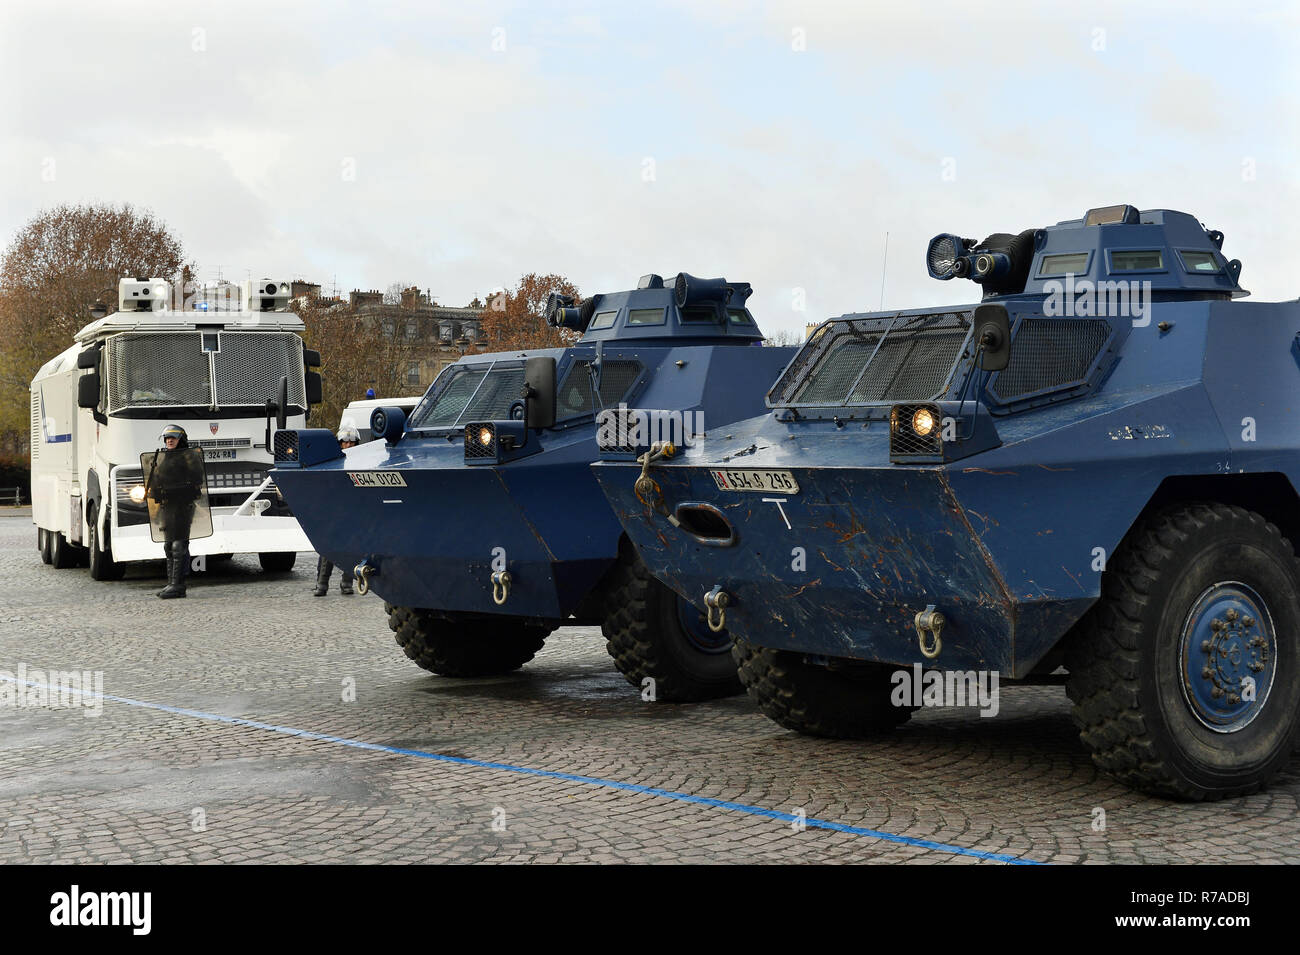 Armoured vanguard vehicle of anti-riot police - Demonstration of the Yellow  Vests on the Champs-Elysées, on saturday 8th of december in Paris, France  Credit: Frédéric VIELCANET/Alamy Live News Stock Photo - Alamy